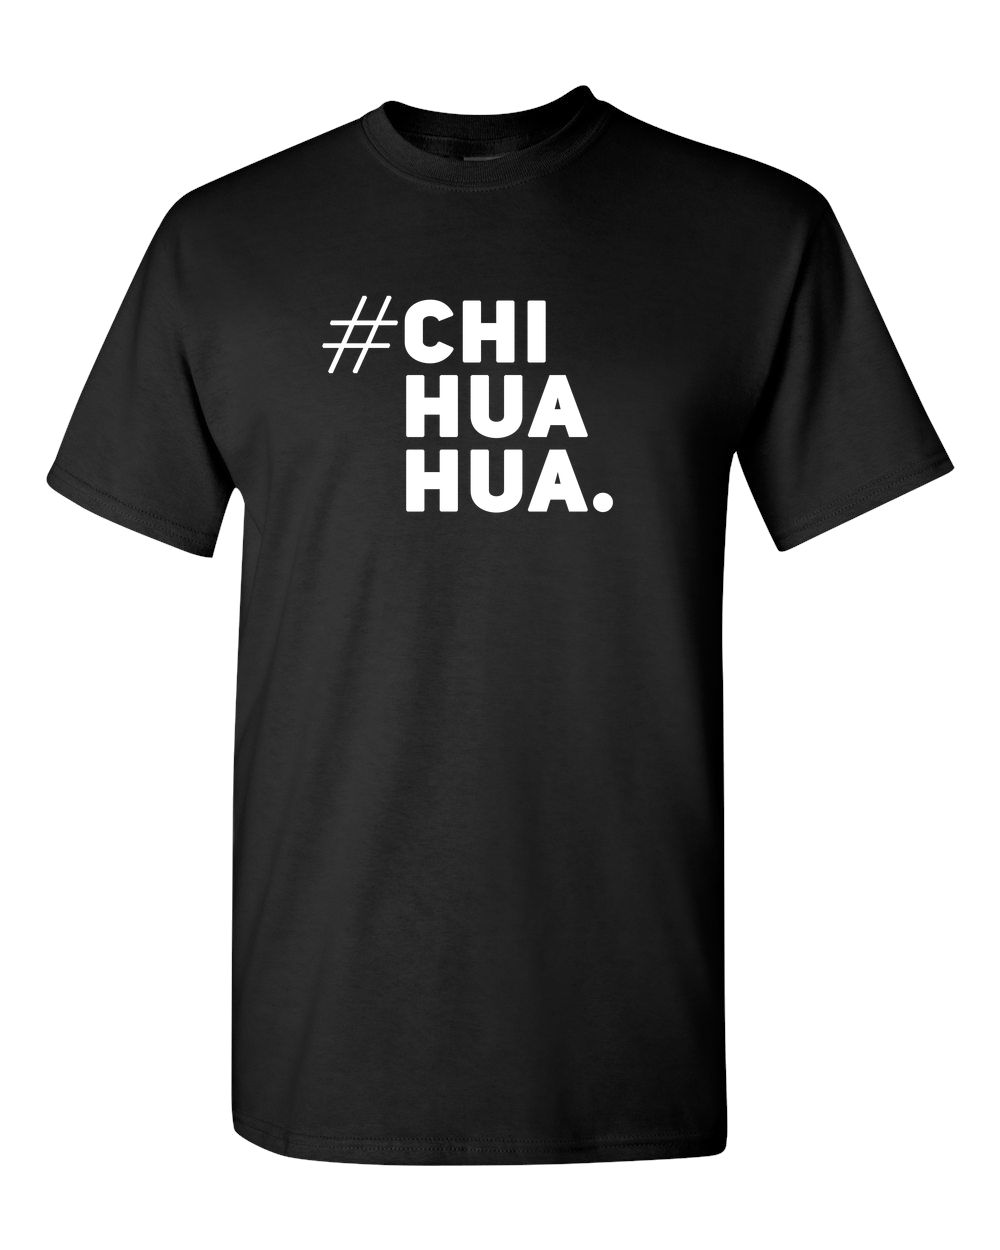 Chihuahua Adult Unisex Funny T-Shirt